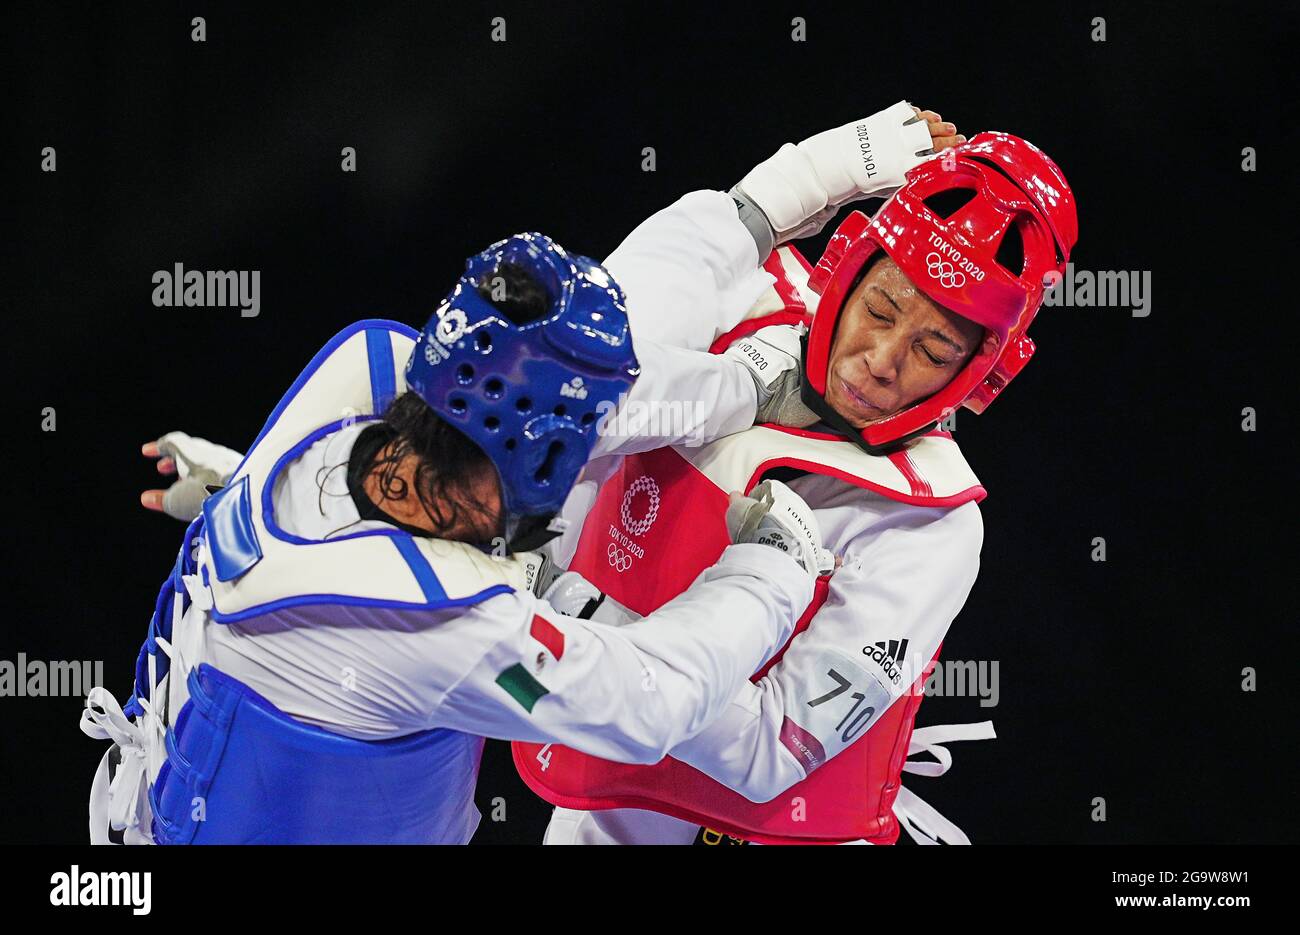 July 27, 2021: Althea Laurin from France and Briseida Acosta from Mexico during Taekwondo at the Tokyo Olympics at Makuhari Messe Hall A, Tokyo, Japan. Kim Price/CSM Stock Photo